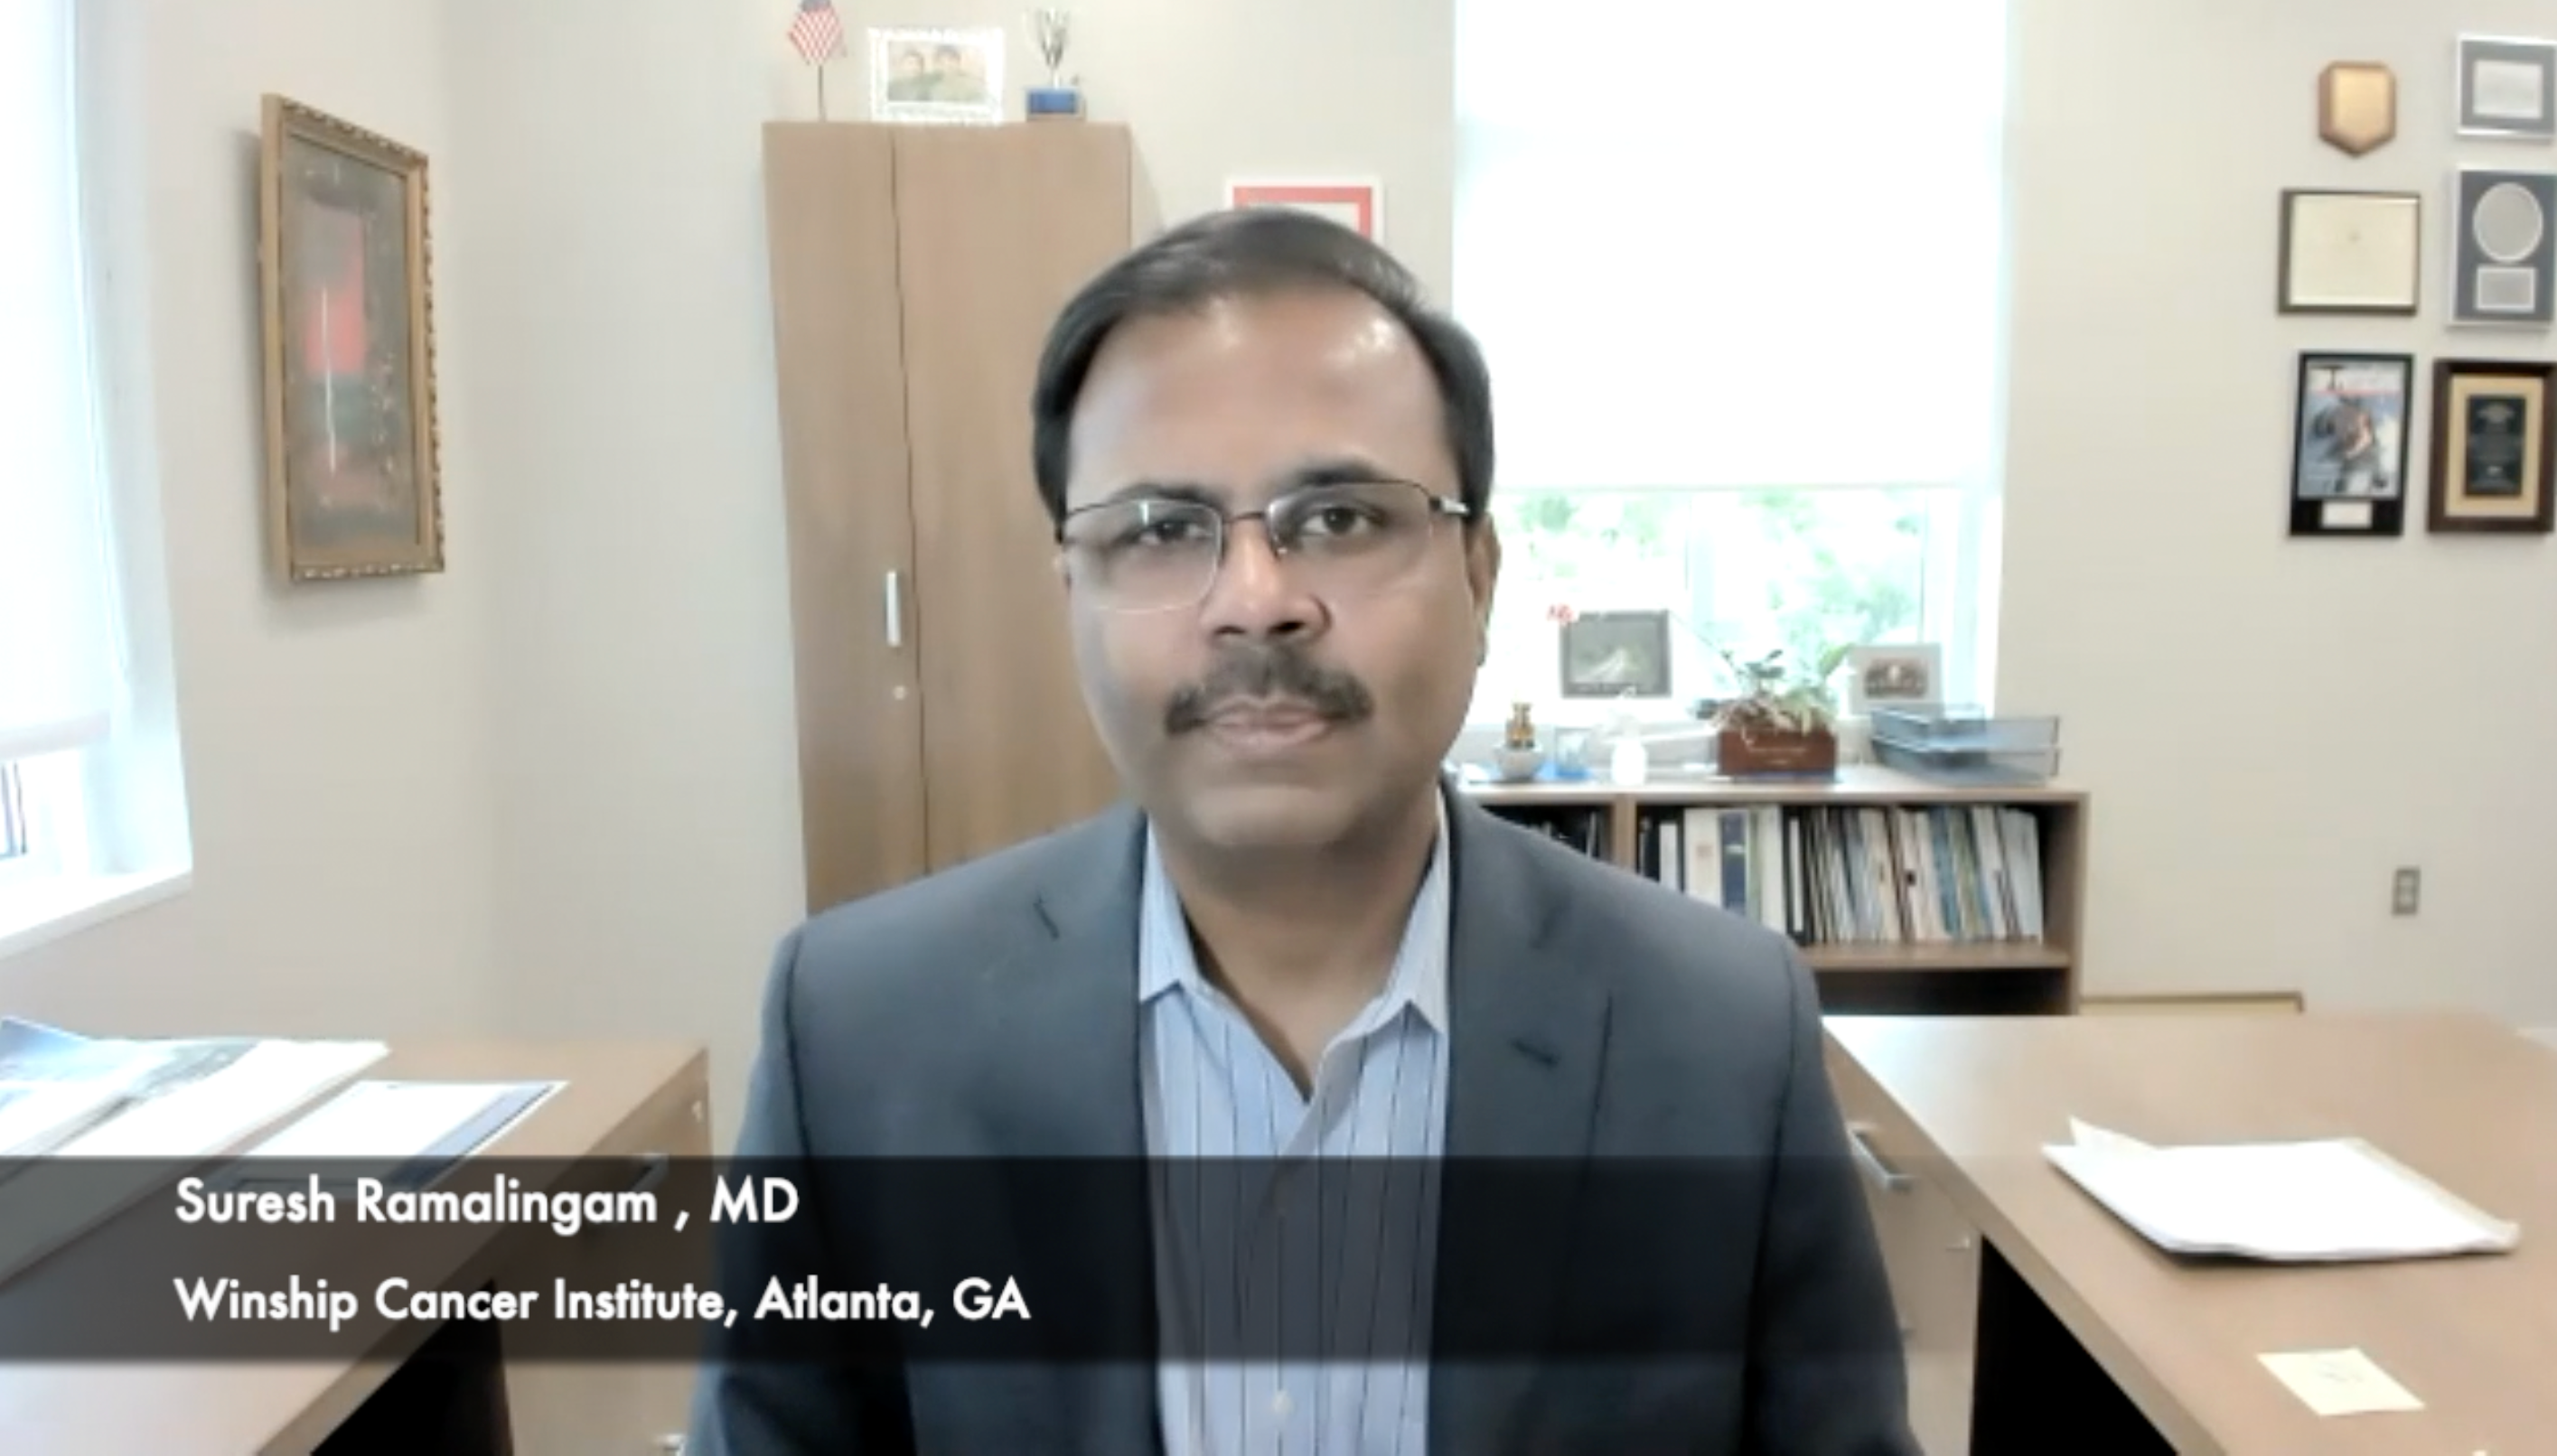 Suresh S. Ramalingam, MD, Discusses Adjuvant Therapy for Early NSCLC at 2021 ASCO